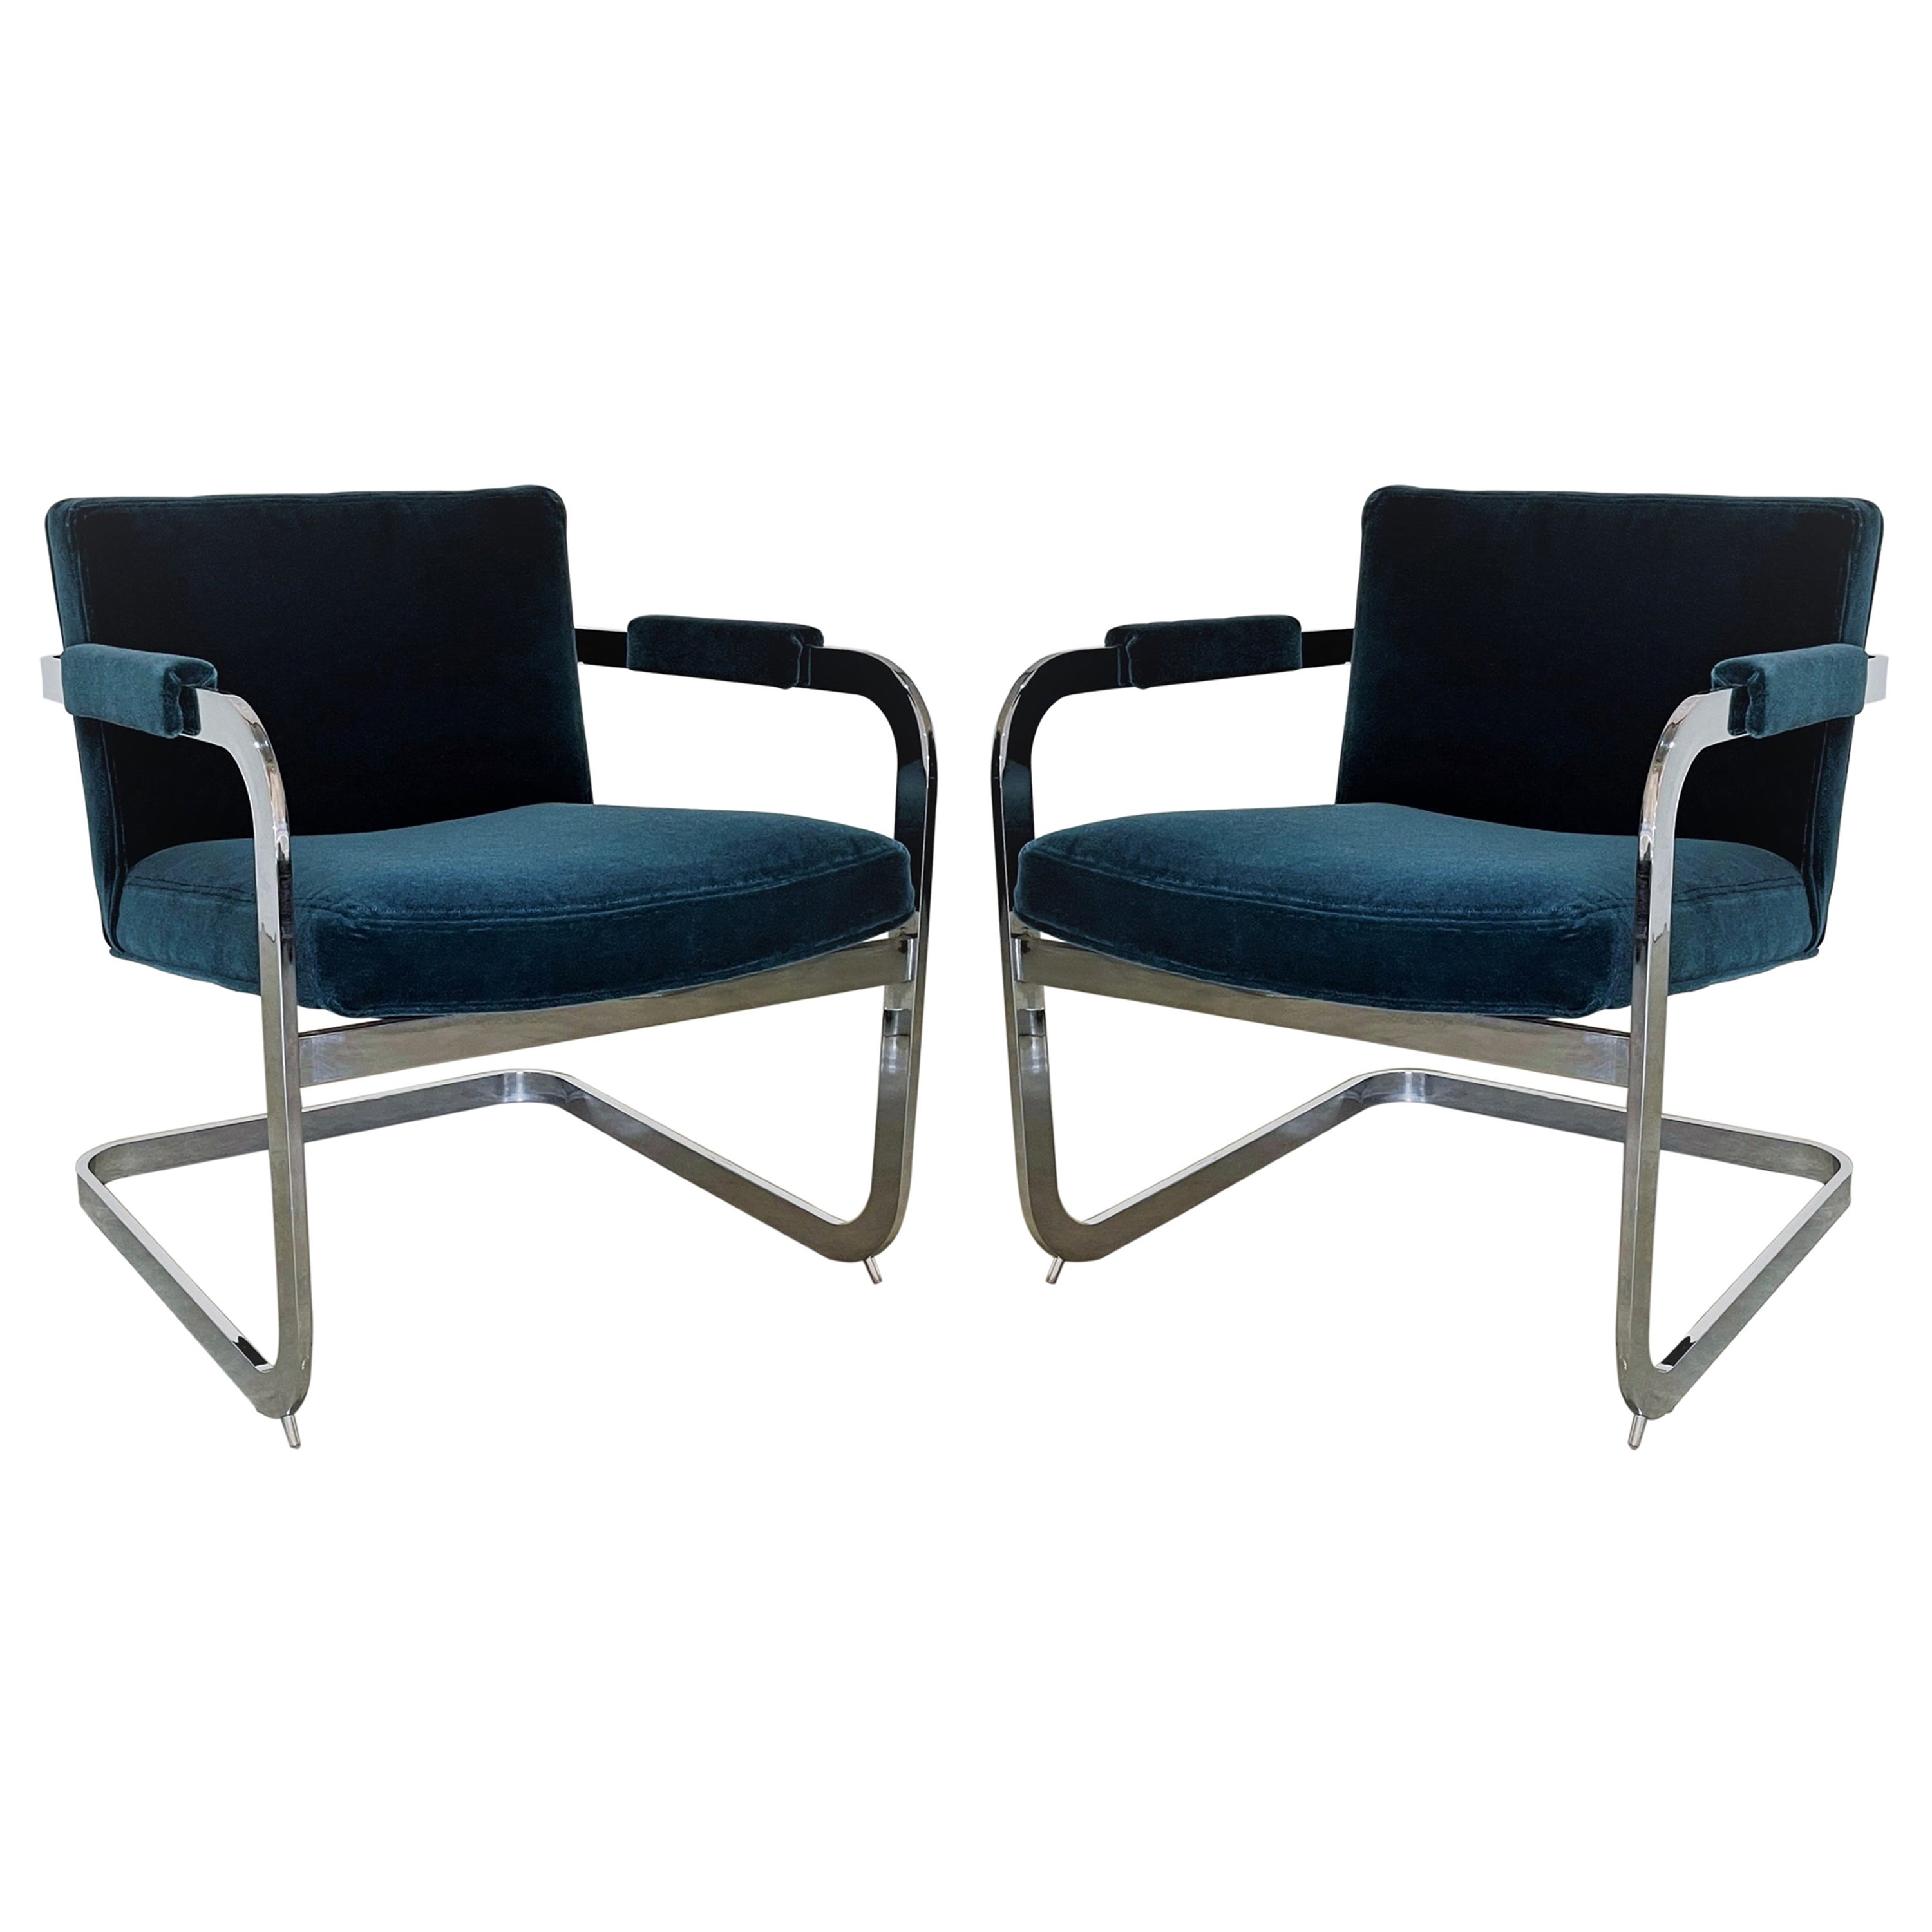 70's Modern Cantilever Armchairs by Milo Baughman for Thayer Coggin